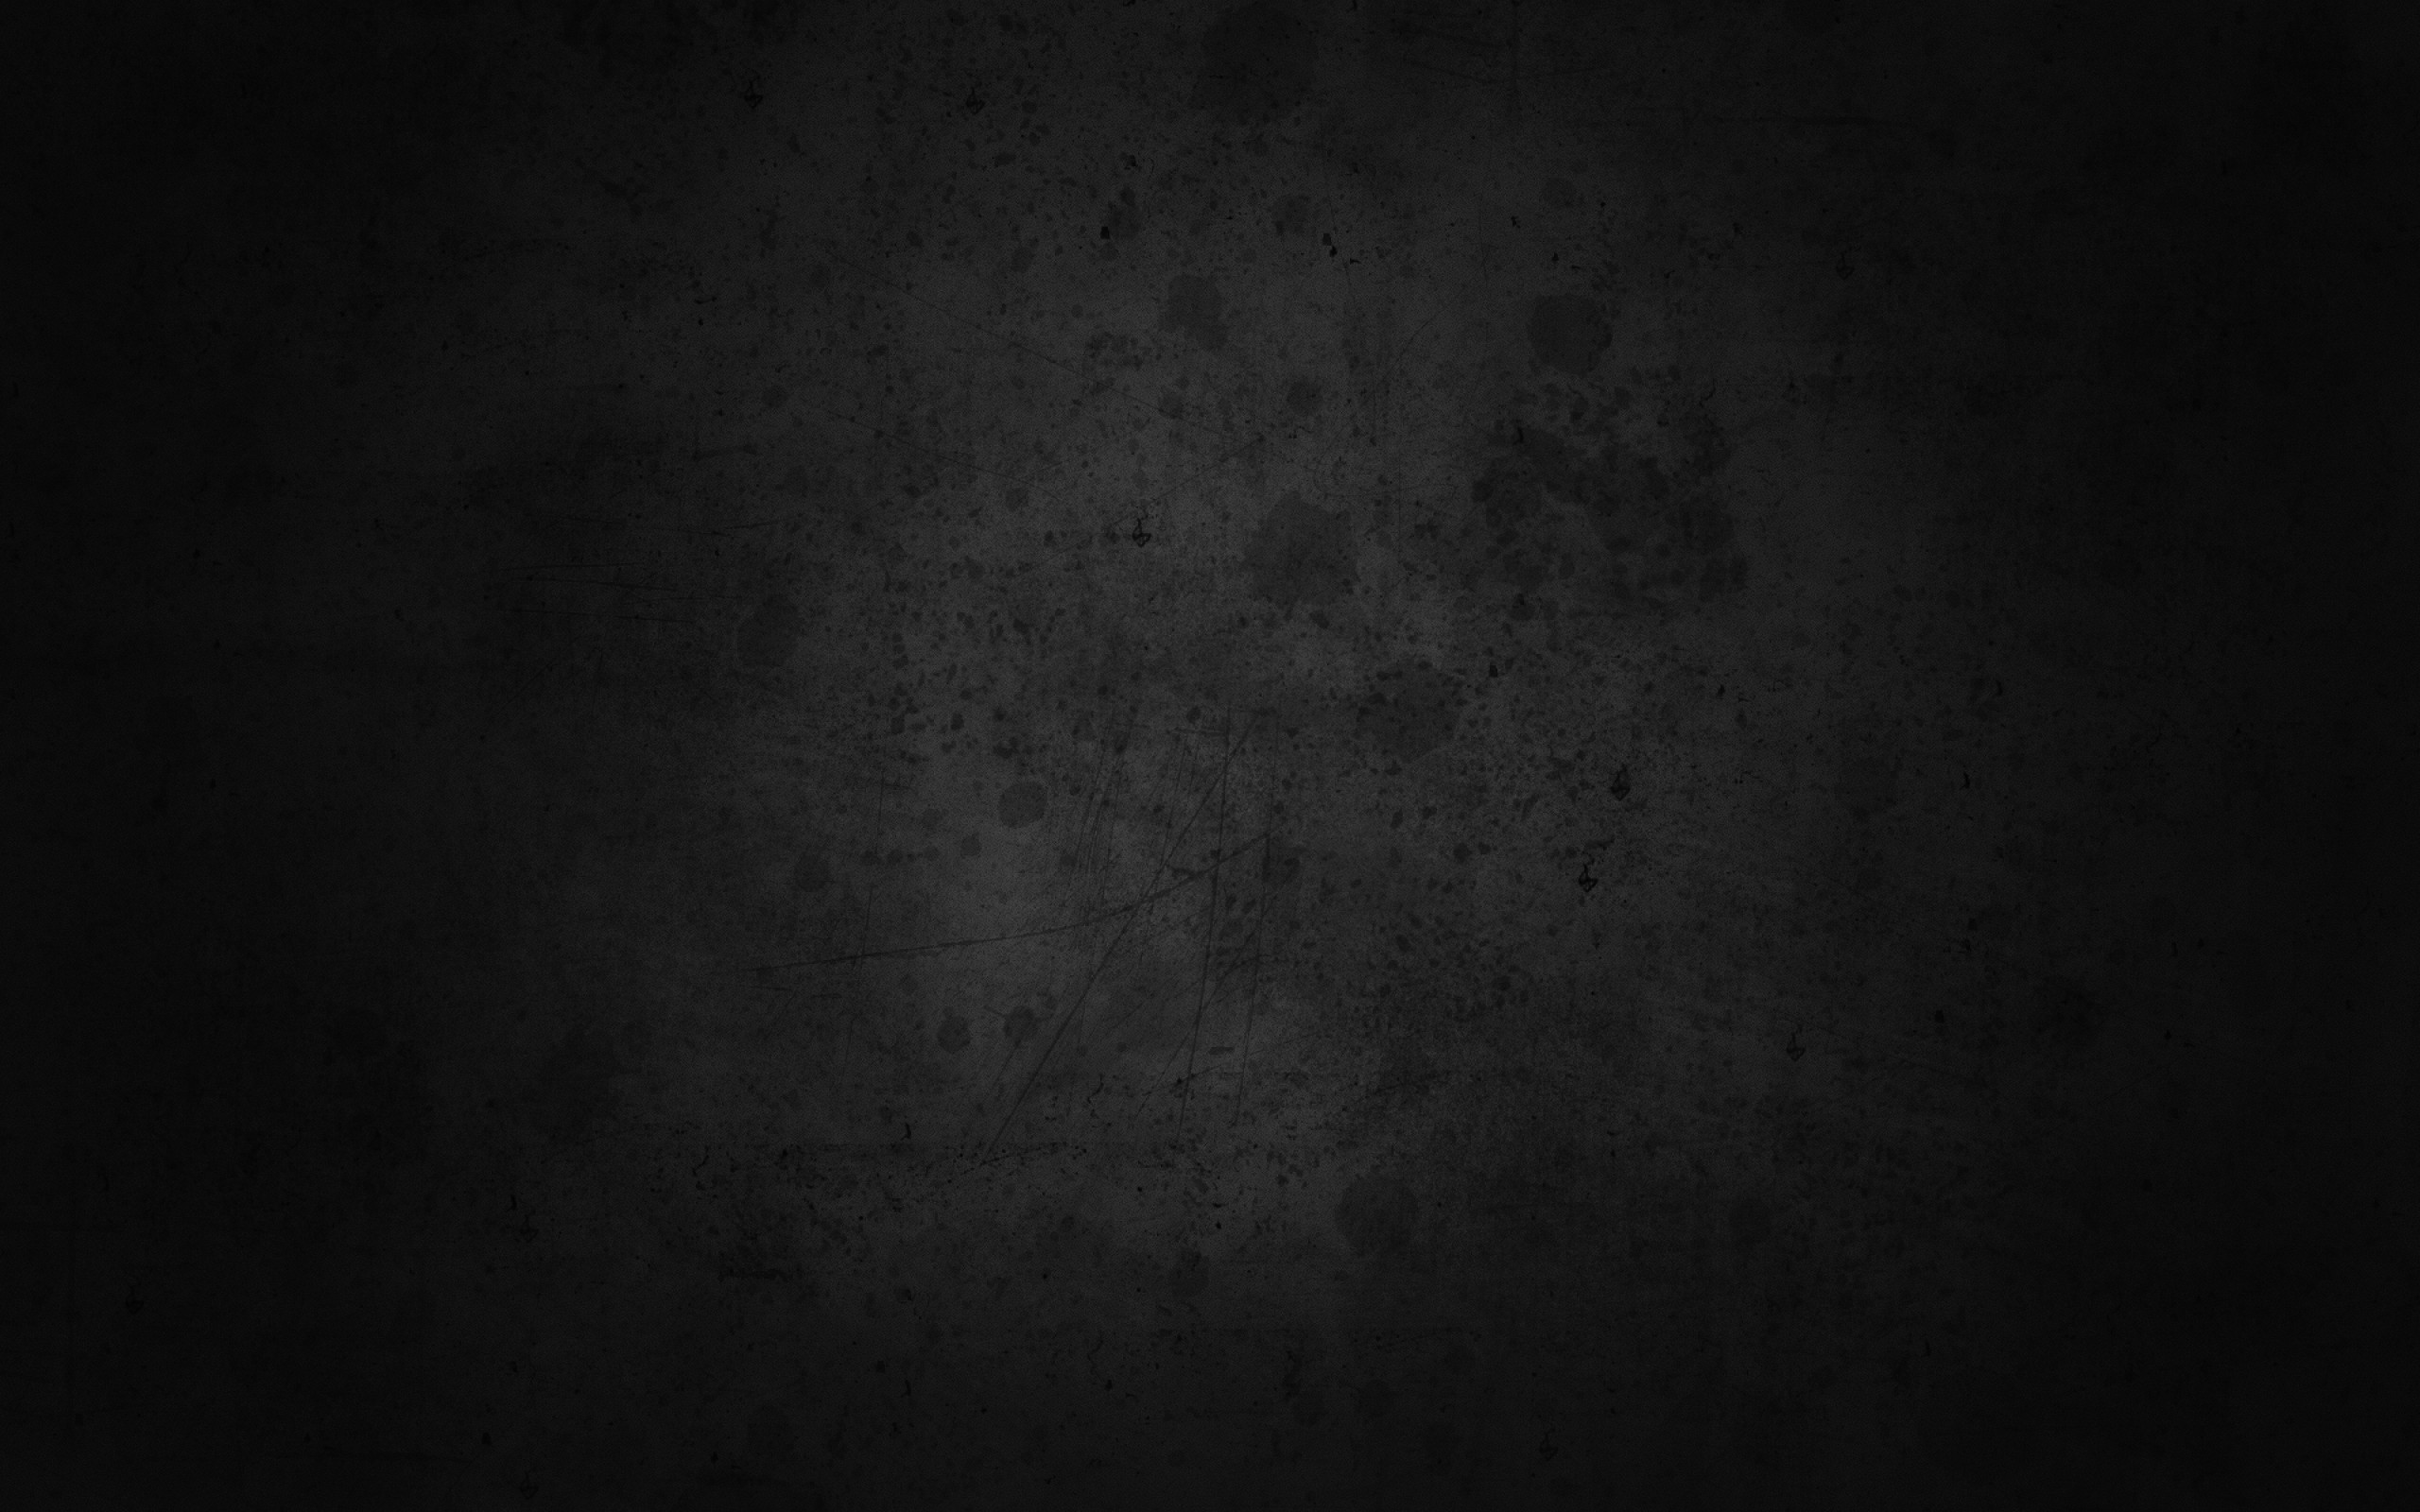 2560x1600 1920x1080 ... black white hd wallpapers 1080p the black posters .